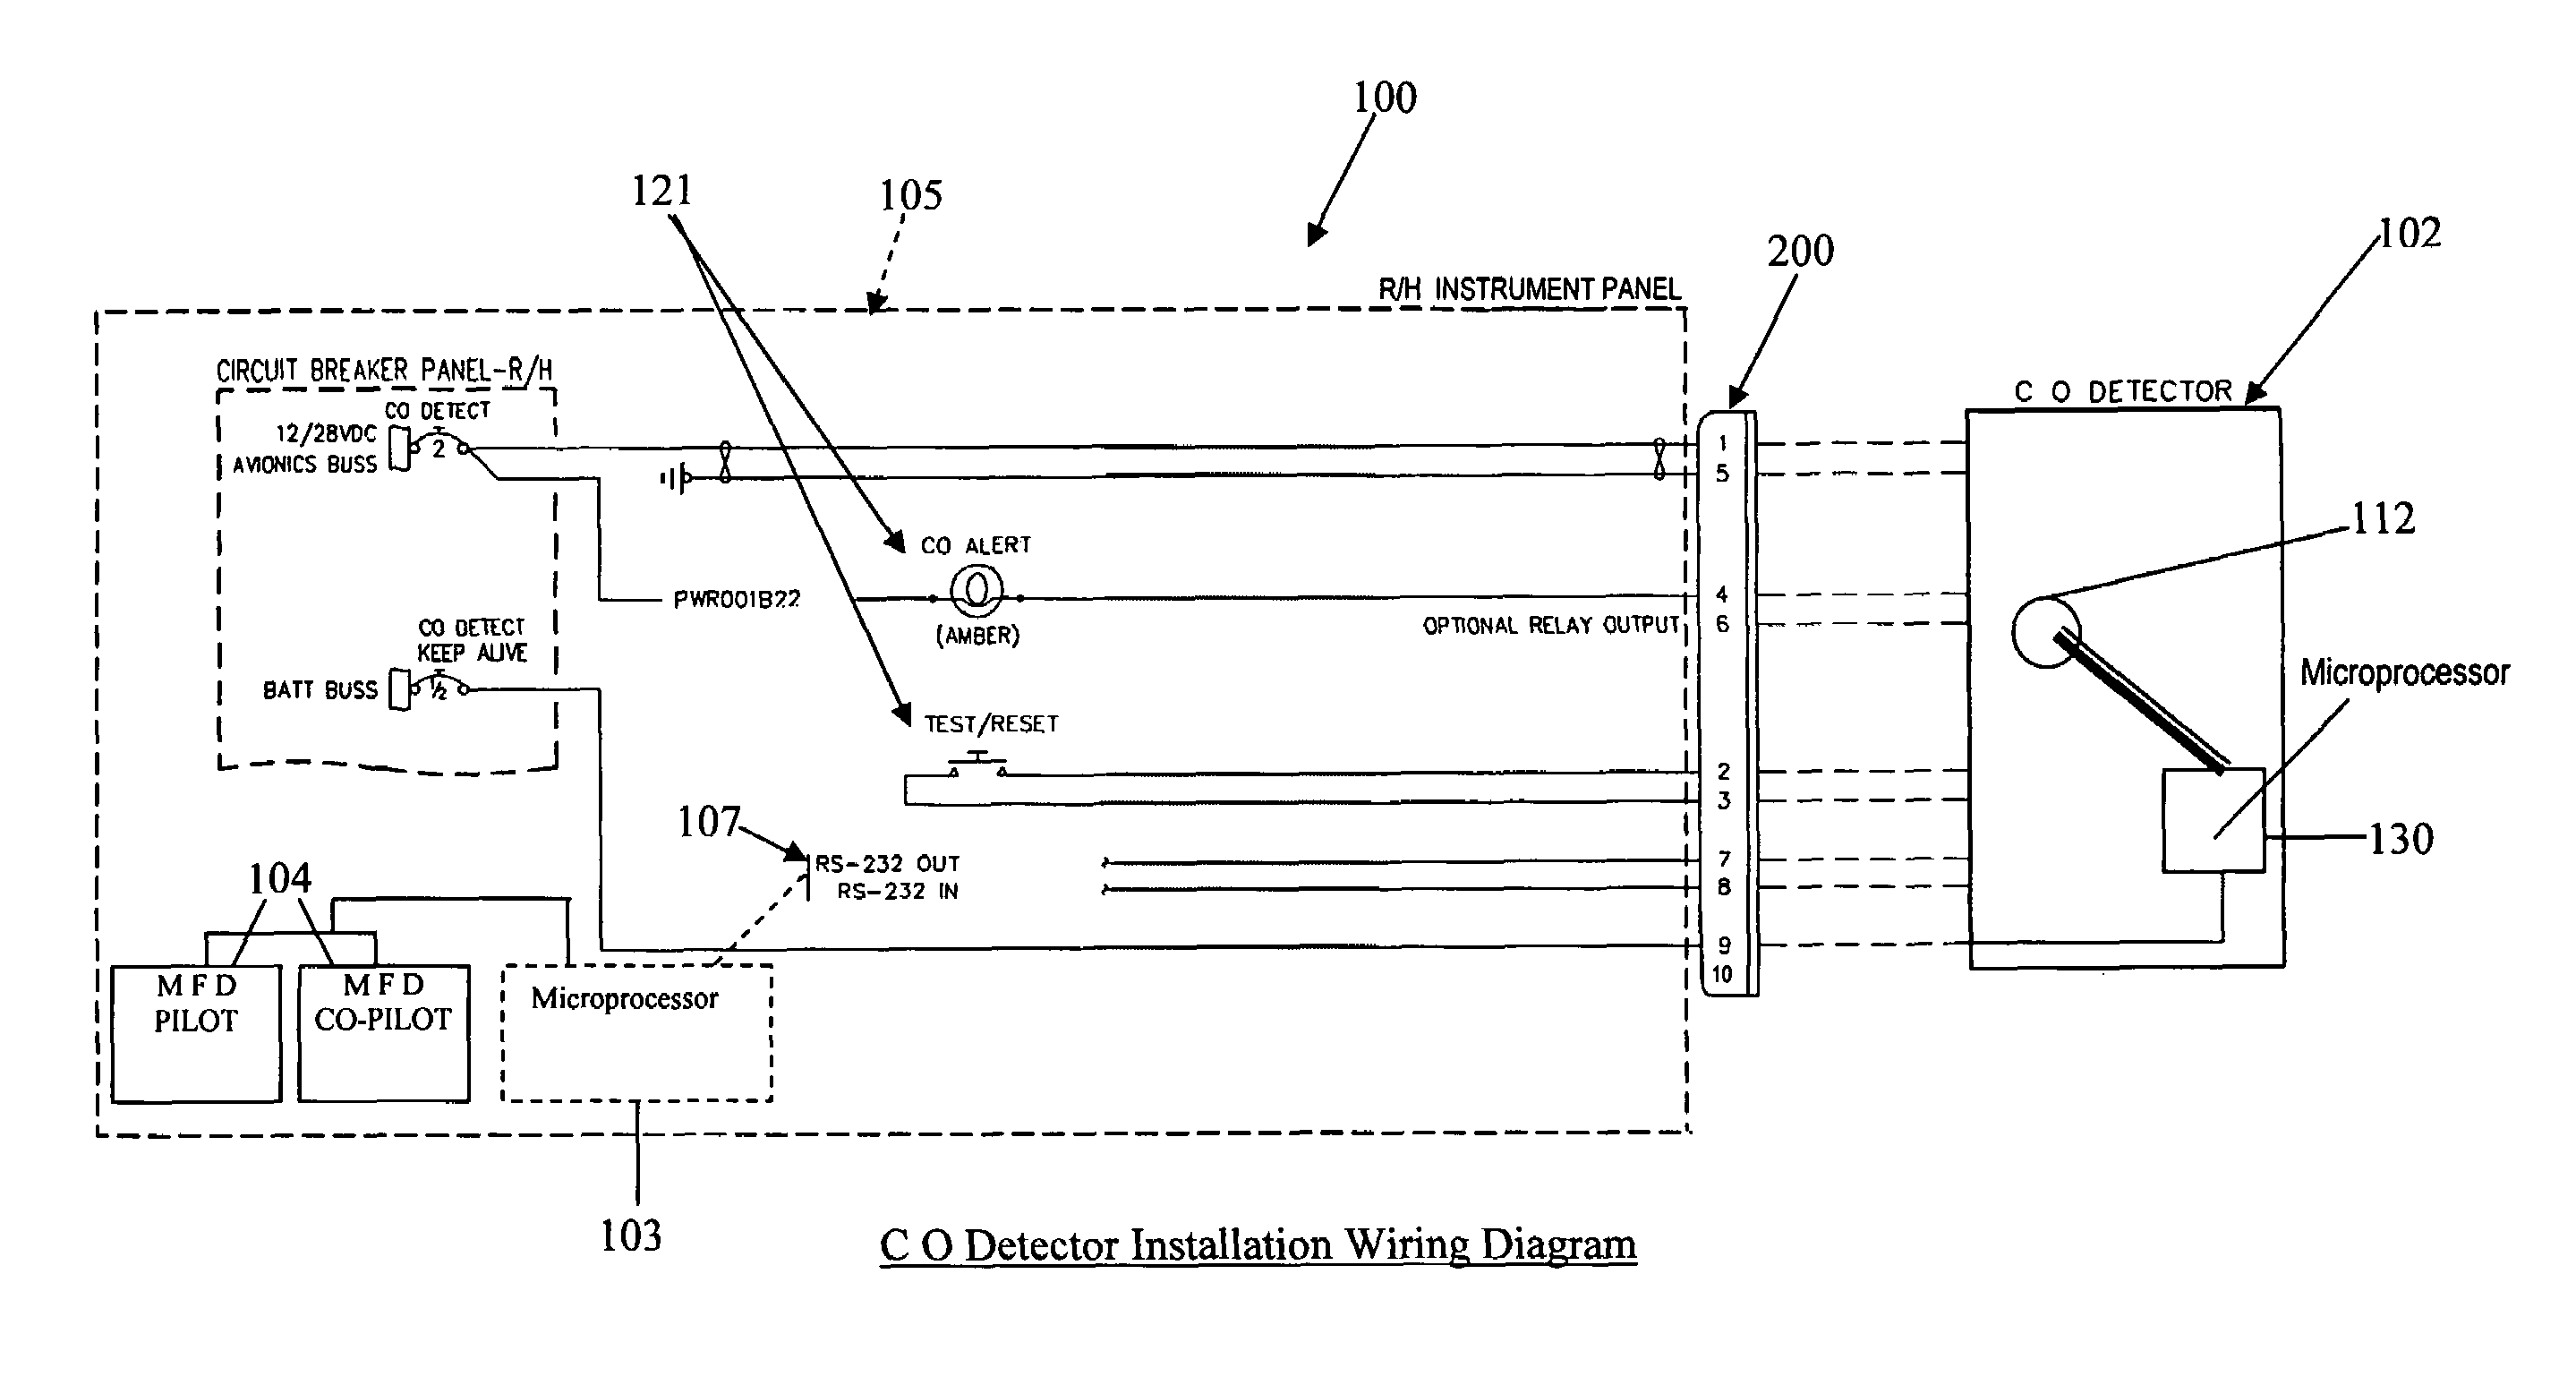 Sensing system and components for detecting and remotely monitoring carbon monoxide in a space of concern